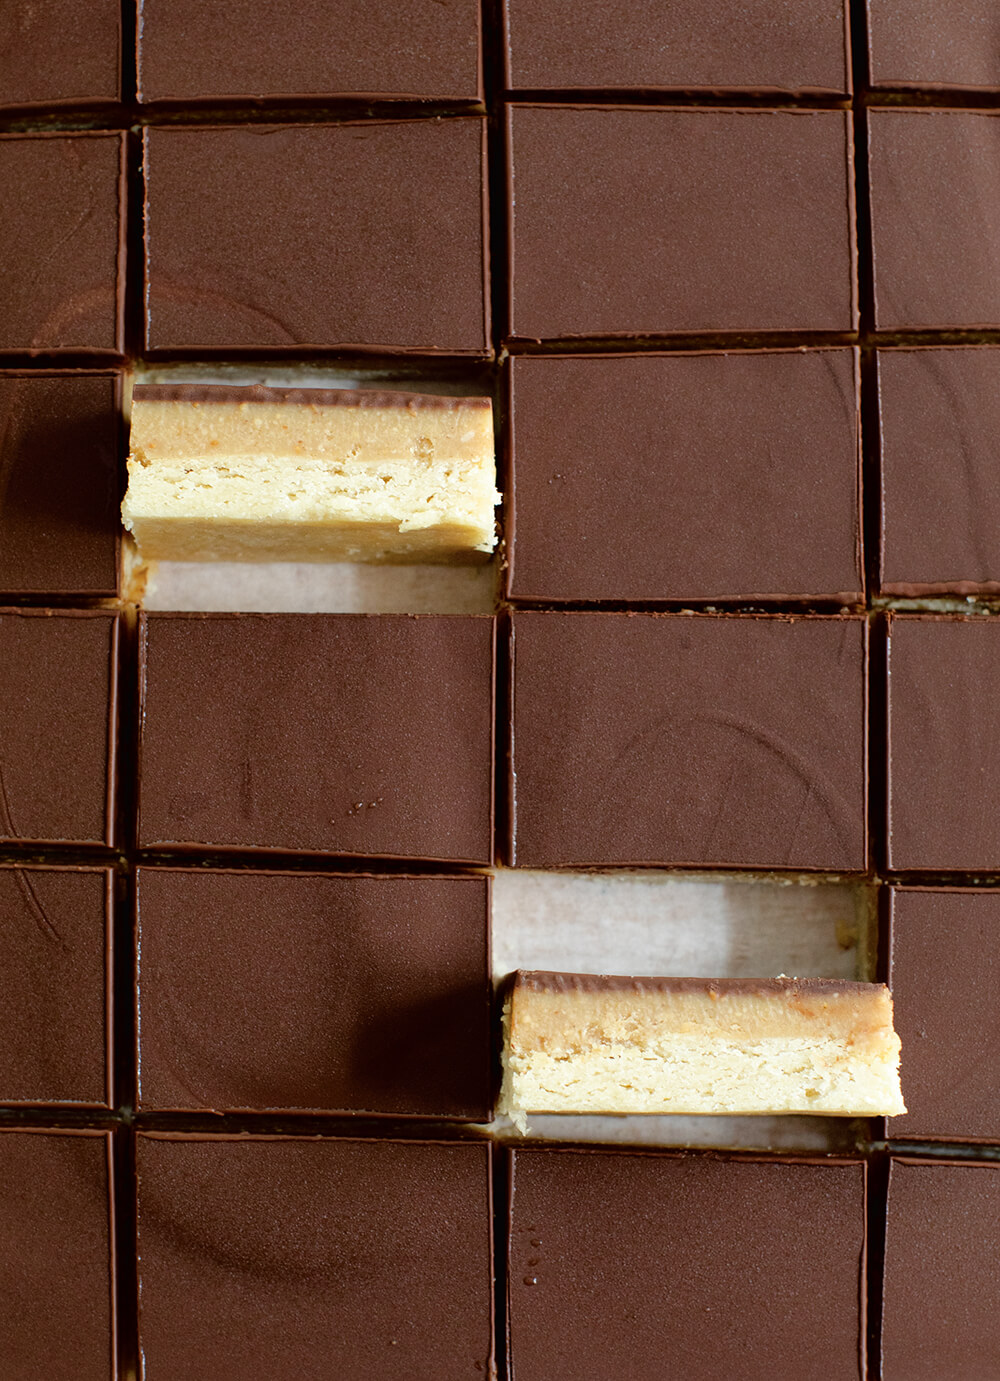 A pan of chocolate-covered bars with two on their sides.